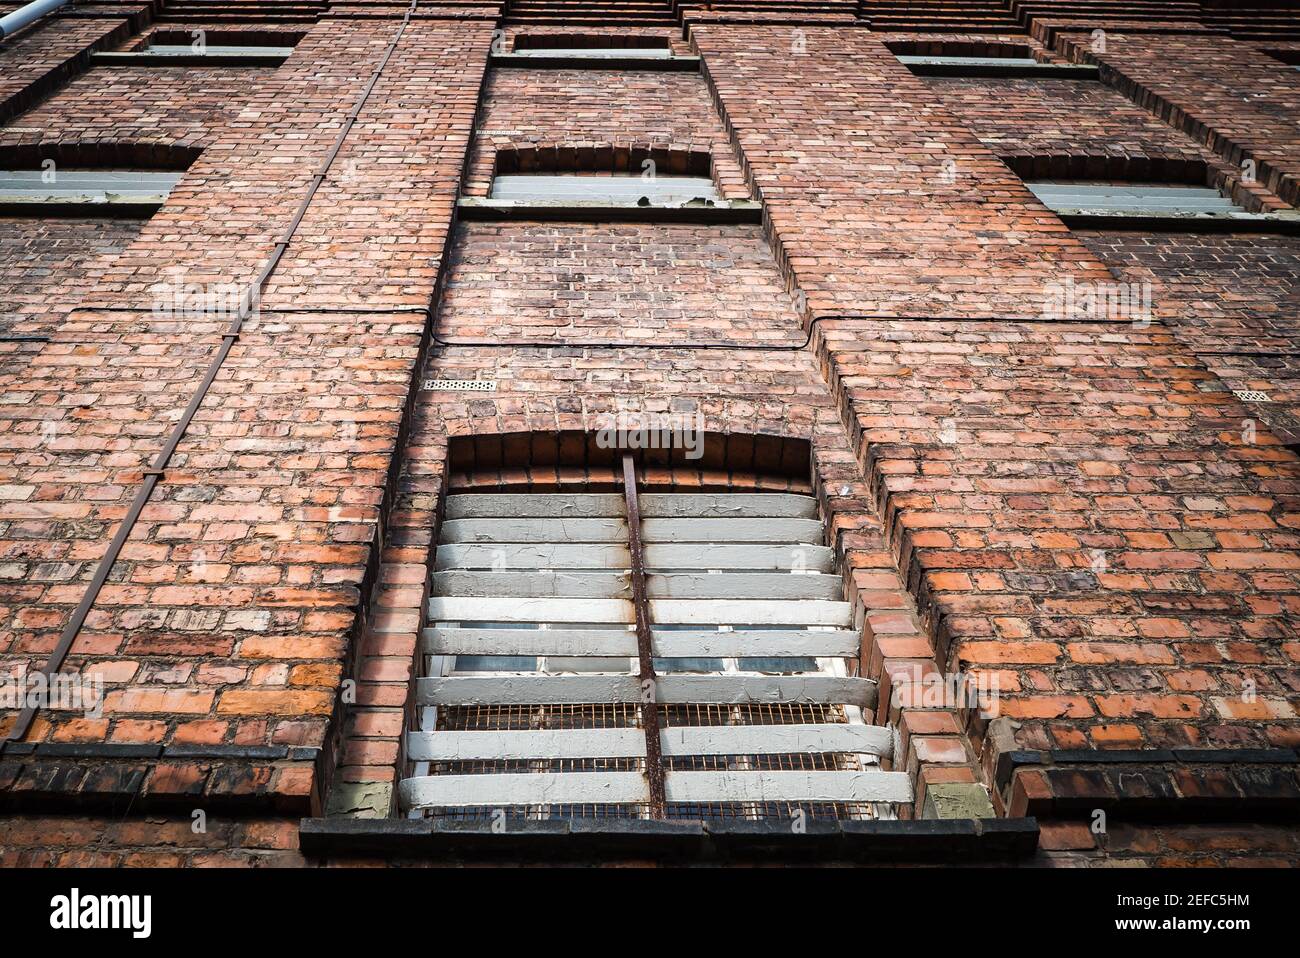 Victorian old red brick prison jail with bars over cell windows of high security run down immigration detention centre in England looking up exterior Stock Photo